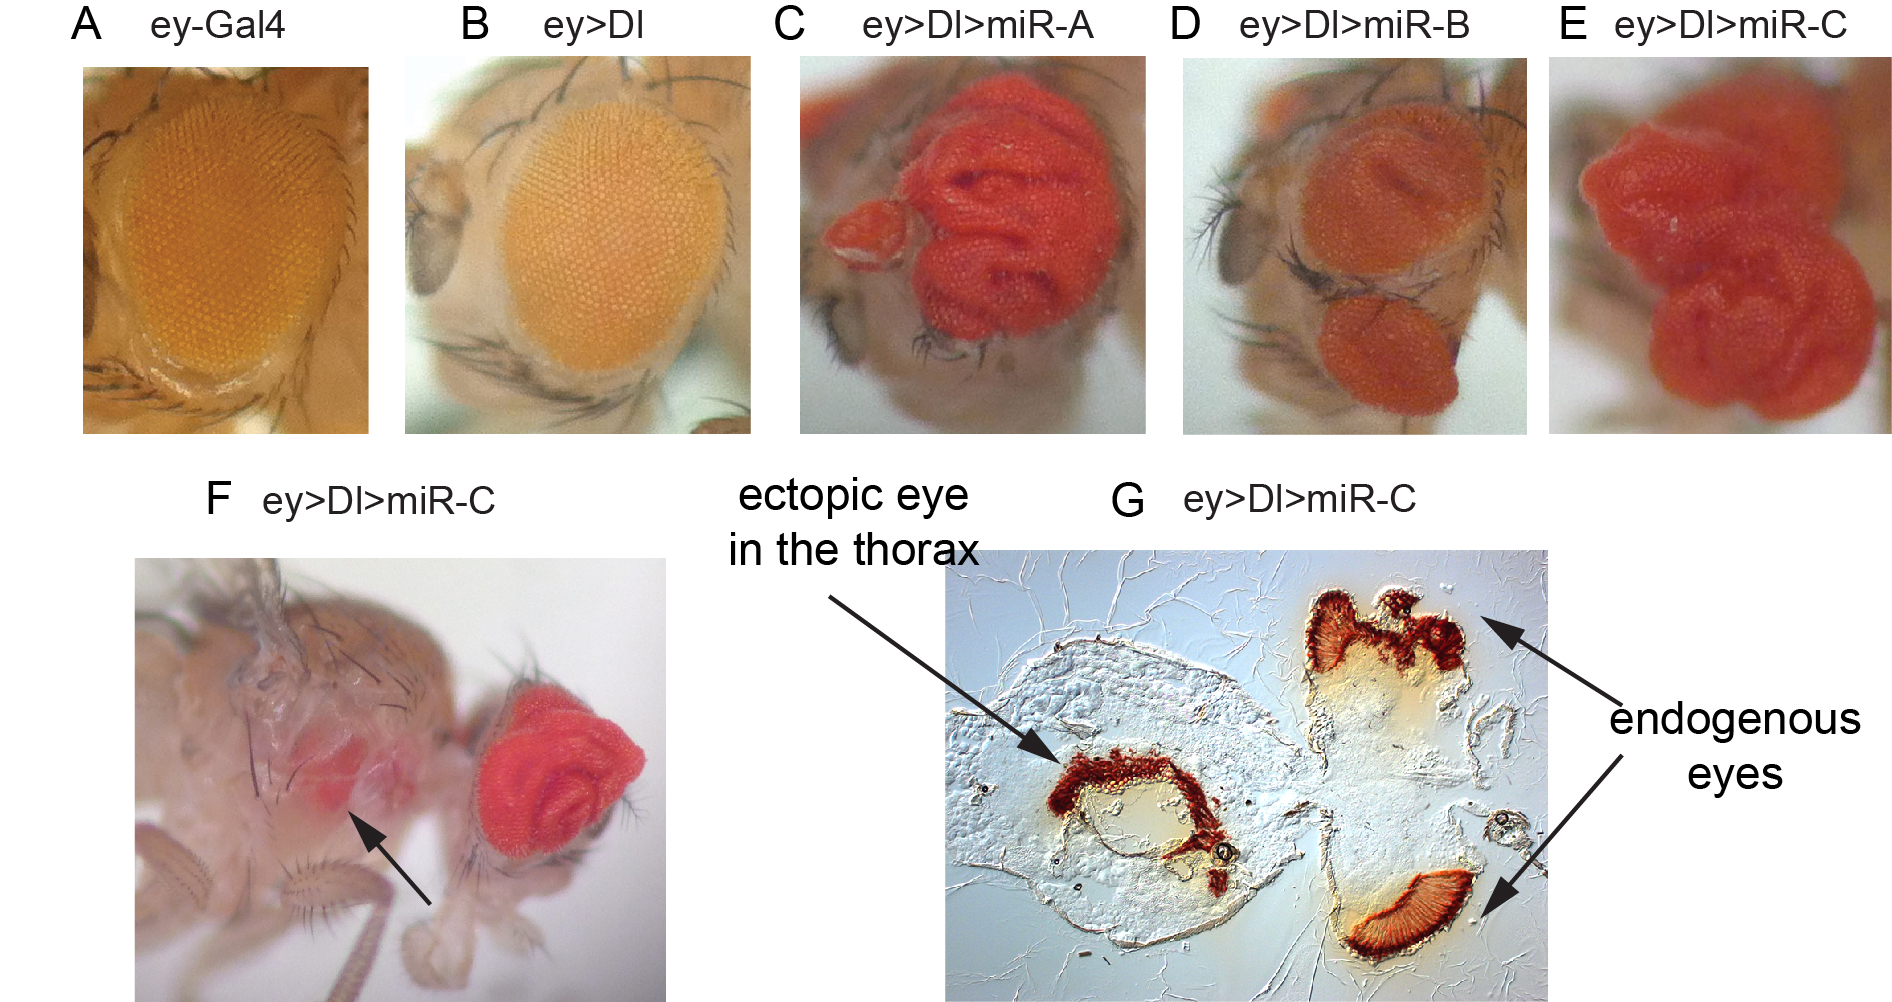 Figure 3. In vivo miRNA misexpression genetic screen. (A-E) Adult eyes that contain driver alone (A), express the Notch ligand Dl (B), or that coexpress Dl with different miRNAs that result in vast expansion of eye tissue (C-E). (F) Example of Dl-miRNA synergisms that yields migration of eye tissue to a distant location. (G) Sectioning confirm the presence of an ectopic eye in the thorax.